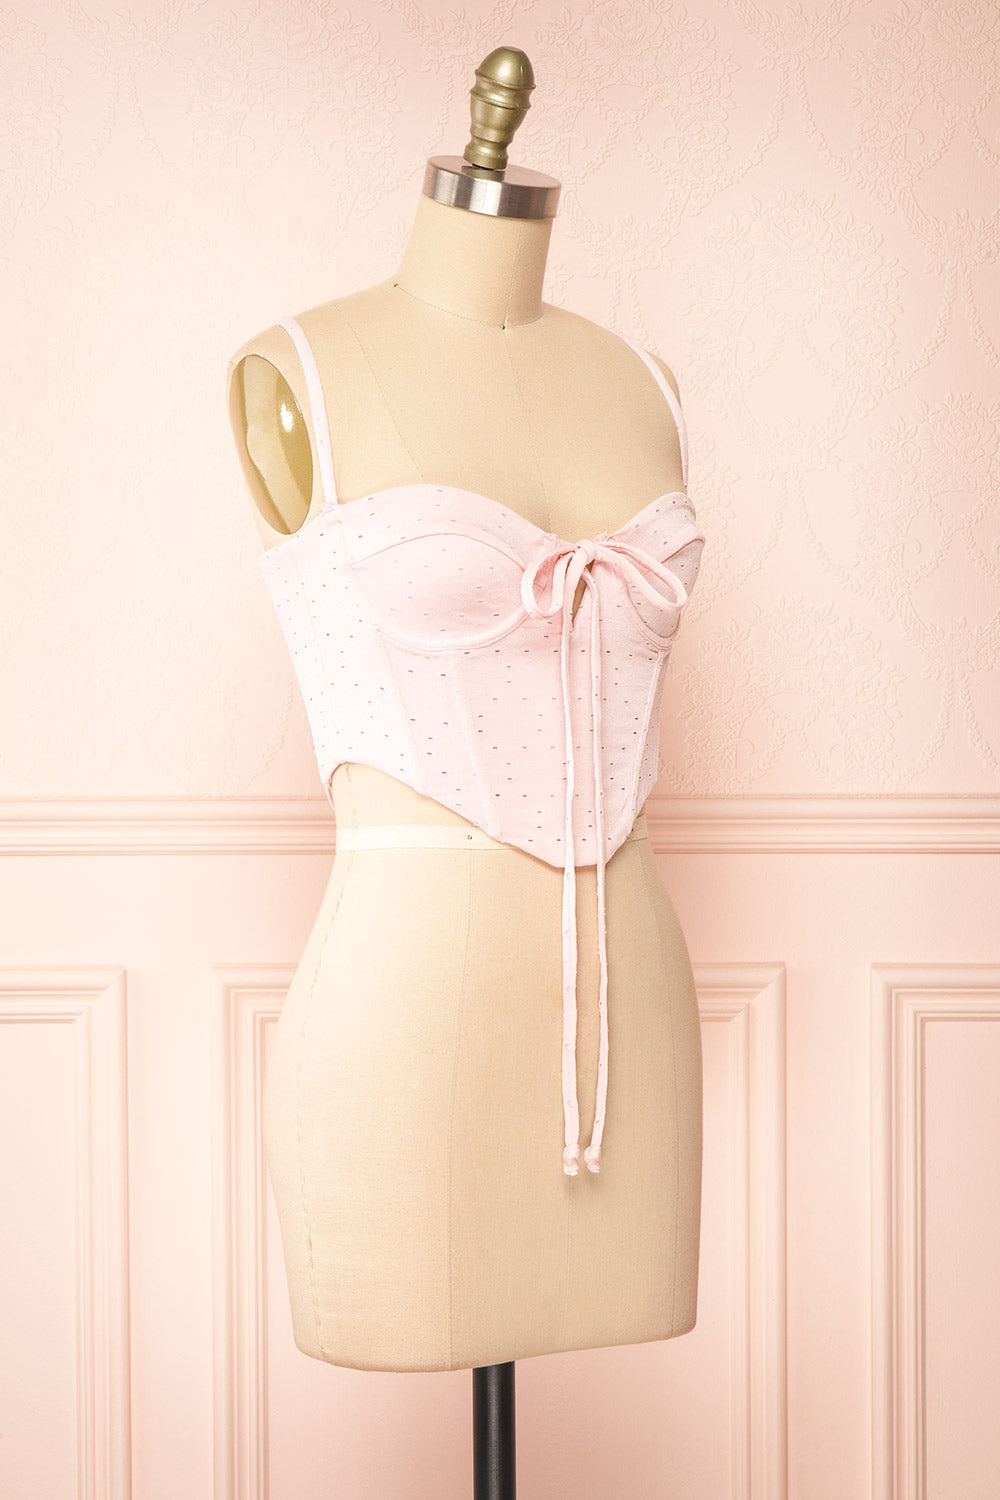 ZARA Tulle Corset Top Pink Size M - $75 New With Tags - From Belinda